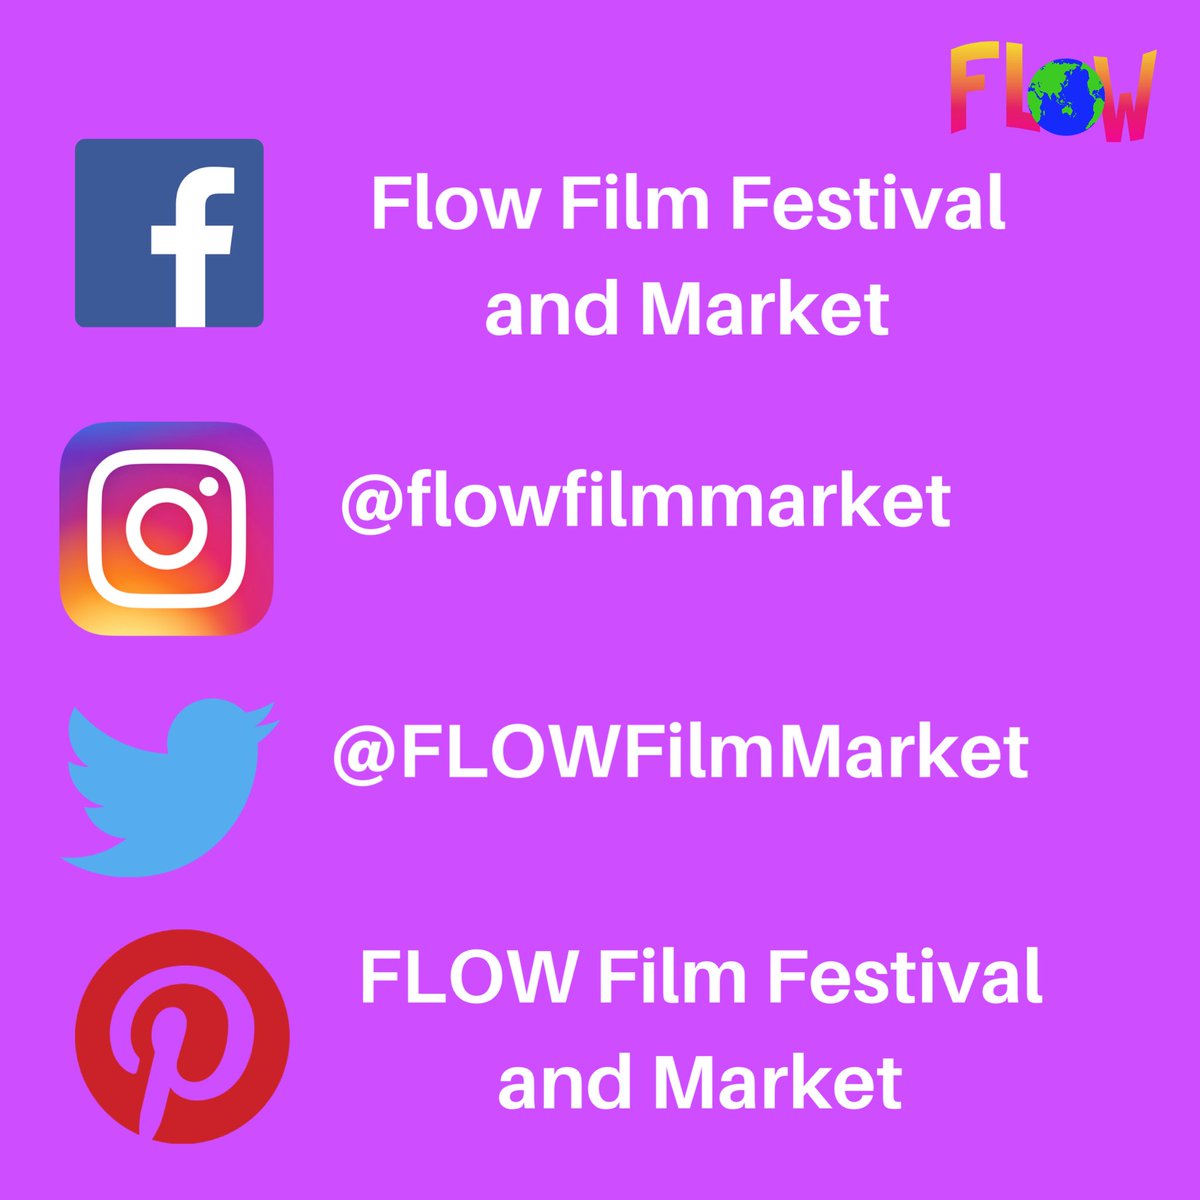 Let's Stay Connected!

#Flow #FlowFilmFestival #FlowFilmFestivalMarket #FlowFFM #FlowEmpowers #FloridaEntertainment #FloridaFilmmakers #FloridaCreatives #WomenEntrepreneurs #WomenEmpowerment #FloridaFilmIndustry #SocialMedia #StayConnected #FollowUs #FloridaNetworking